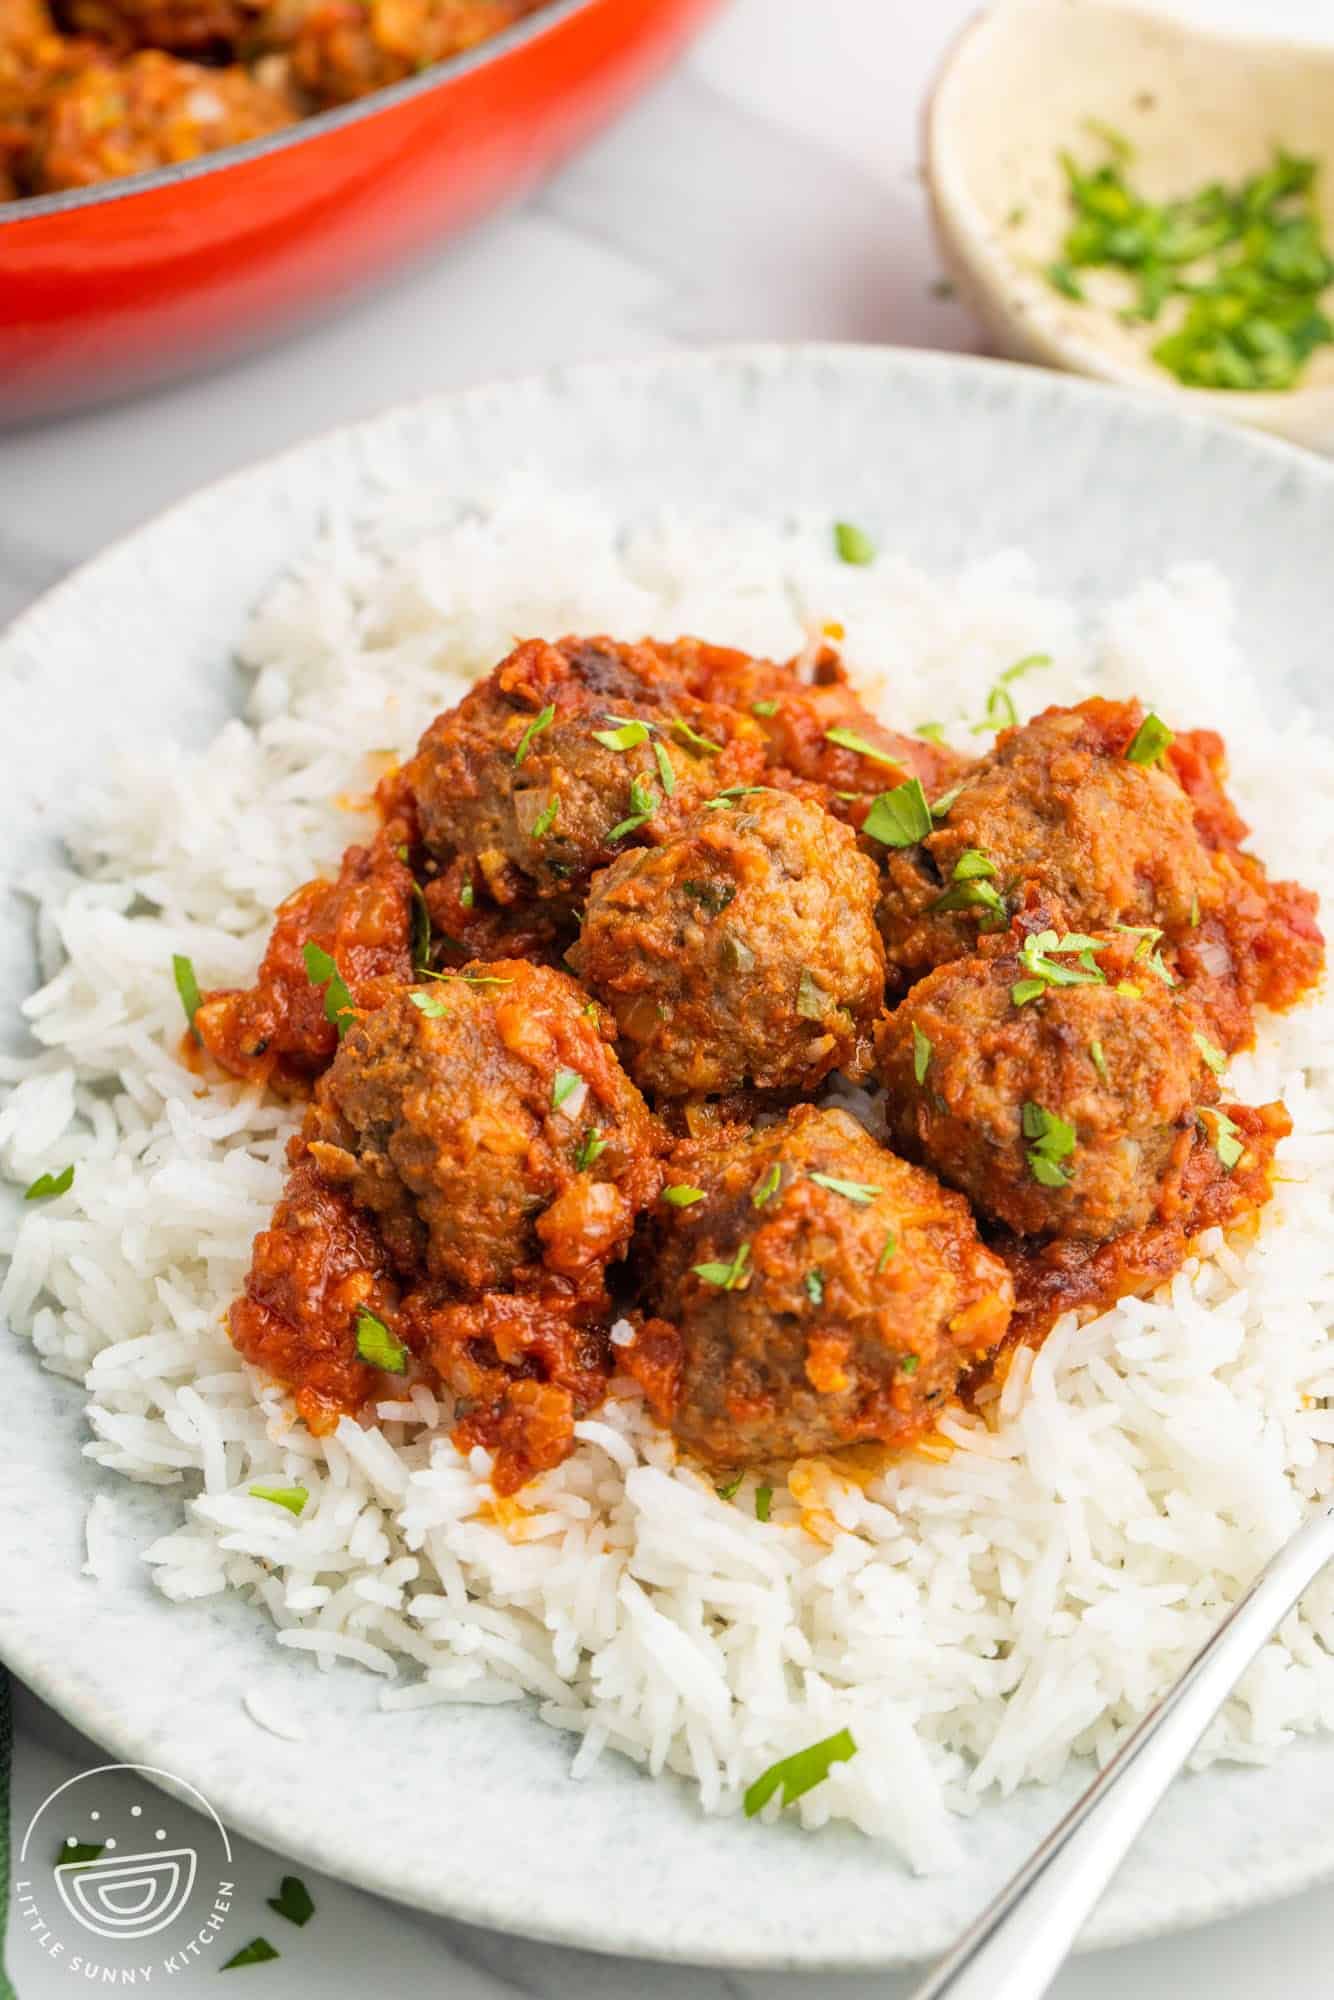 meatballs in tomato sauce with rice on a plate.